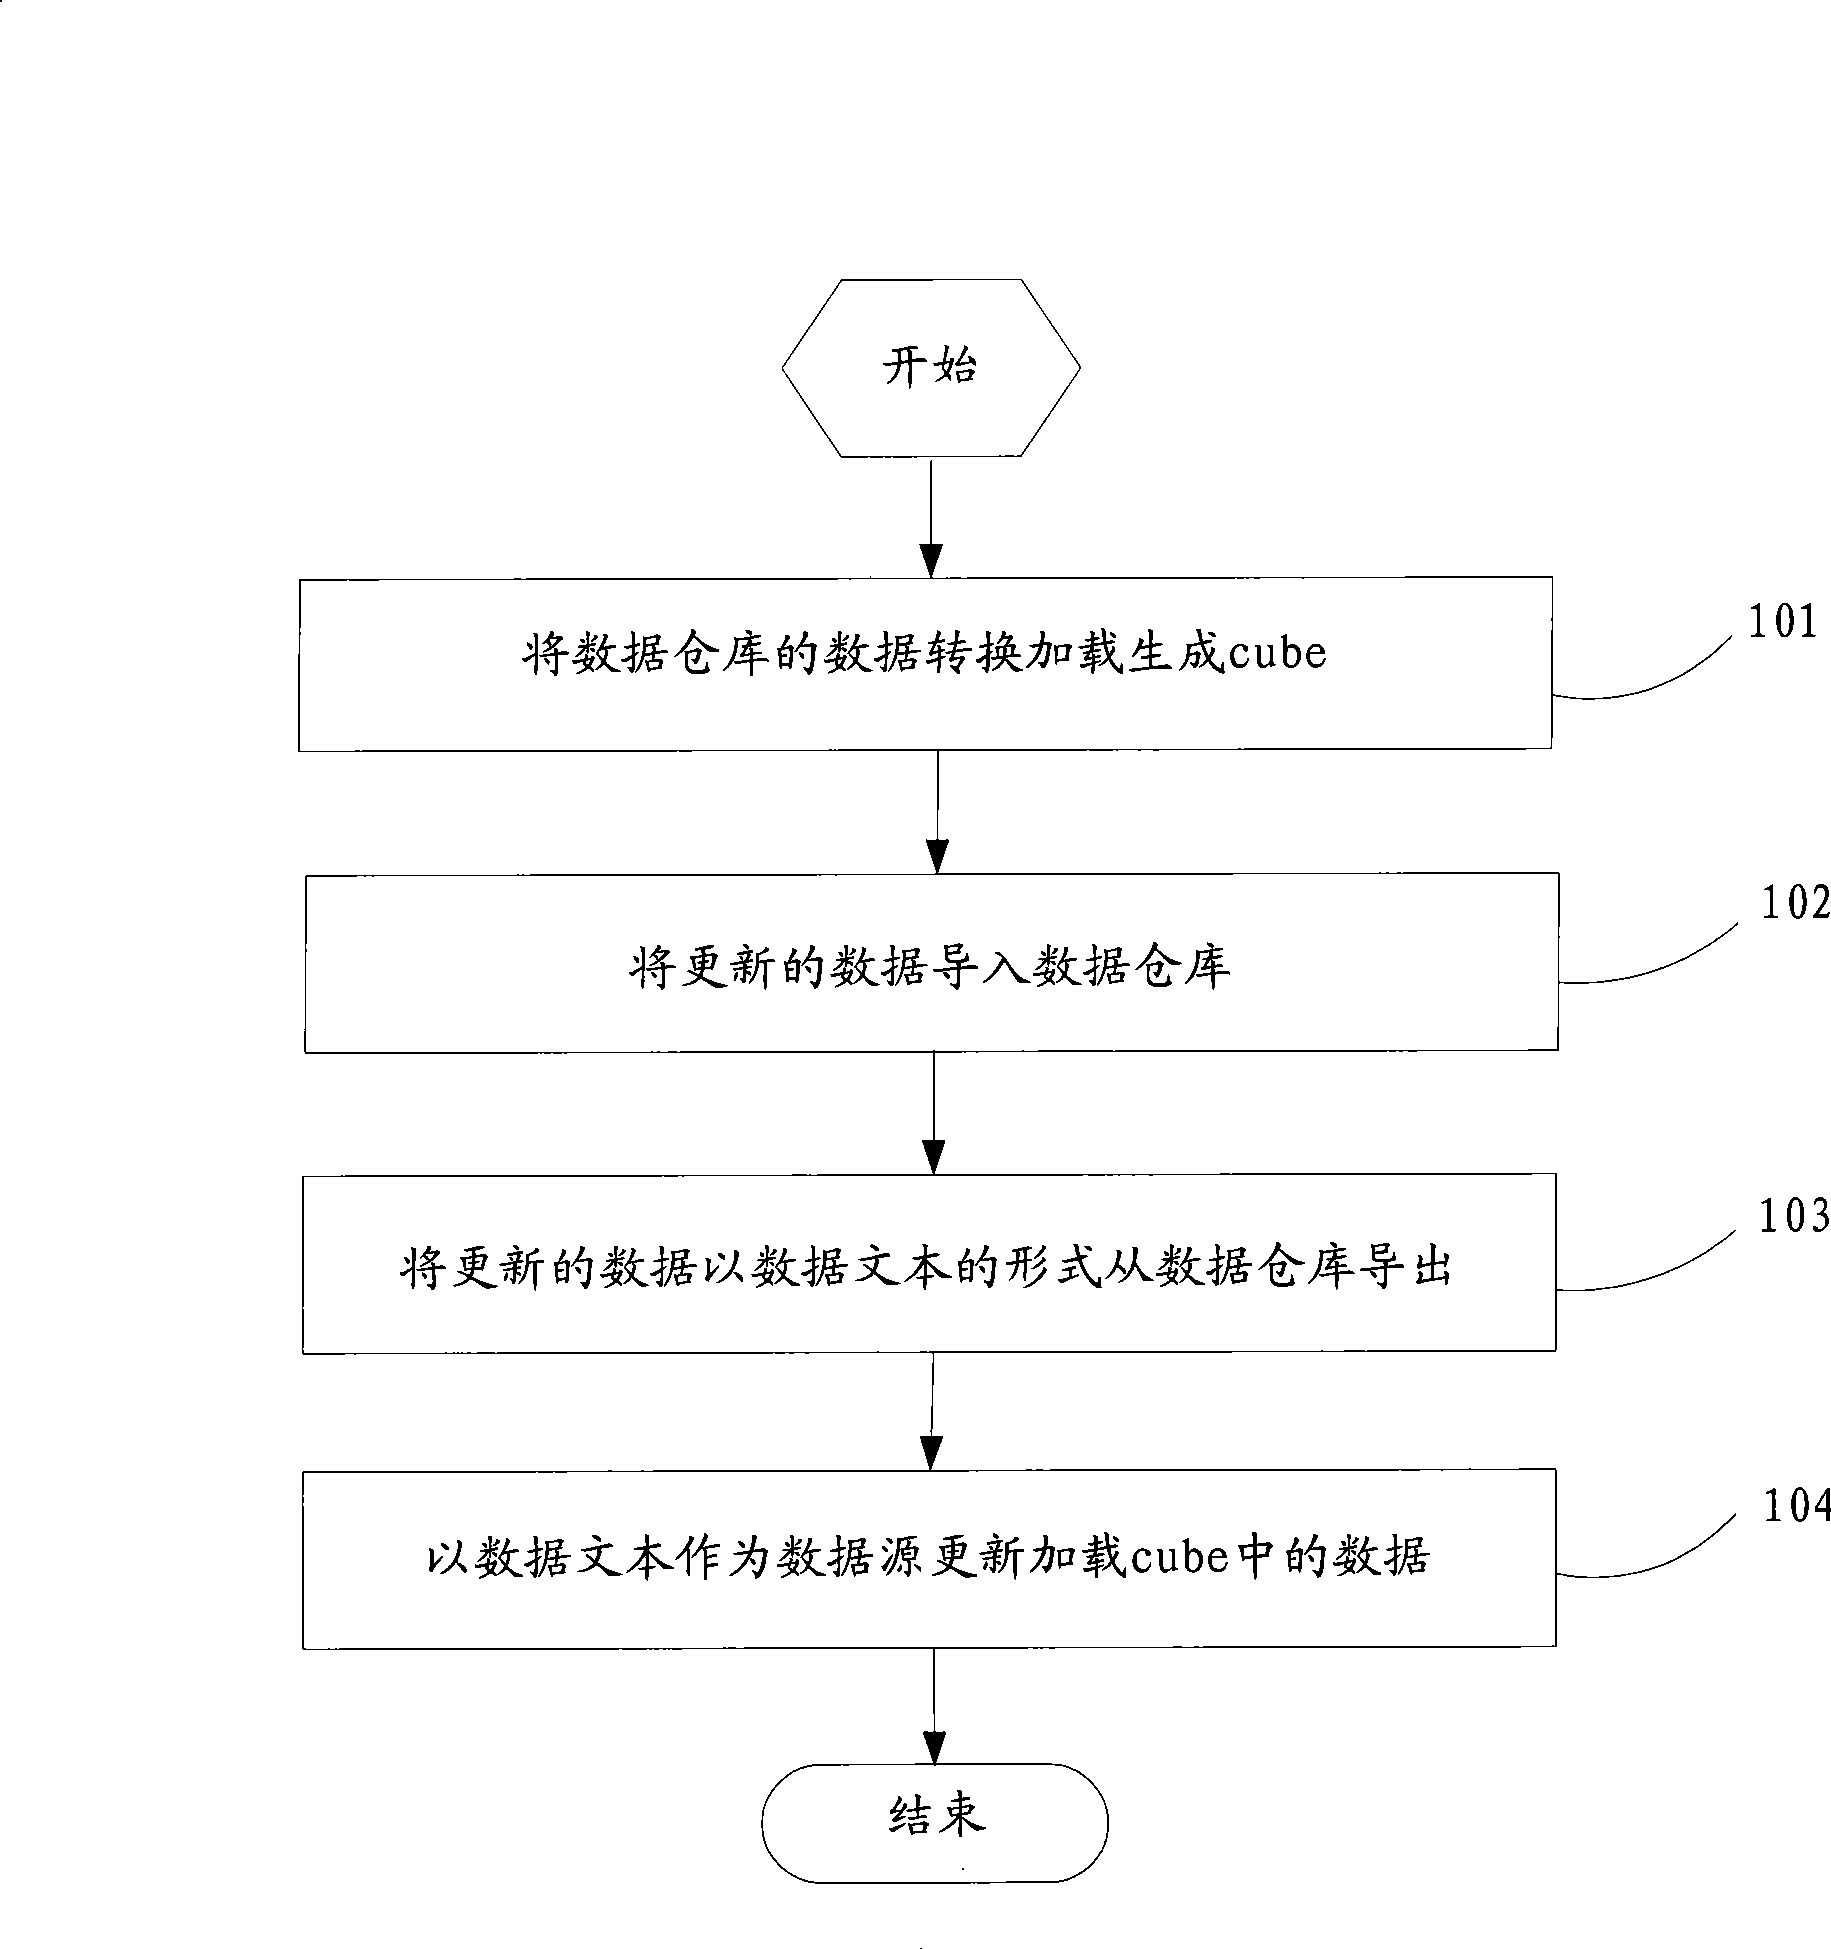 Method and device for generating multidimensional cubic based on relational database